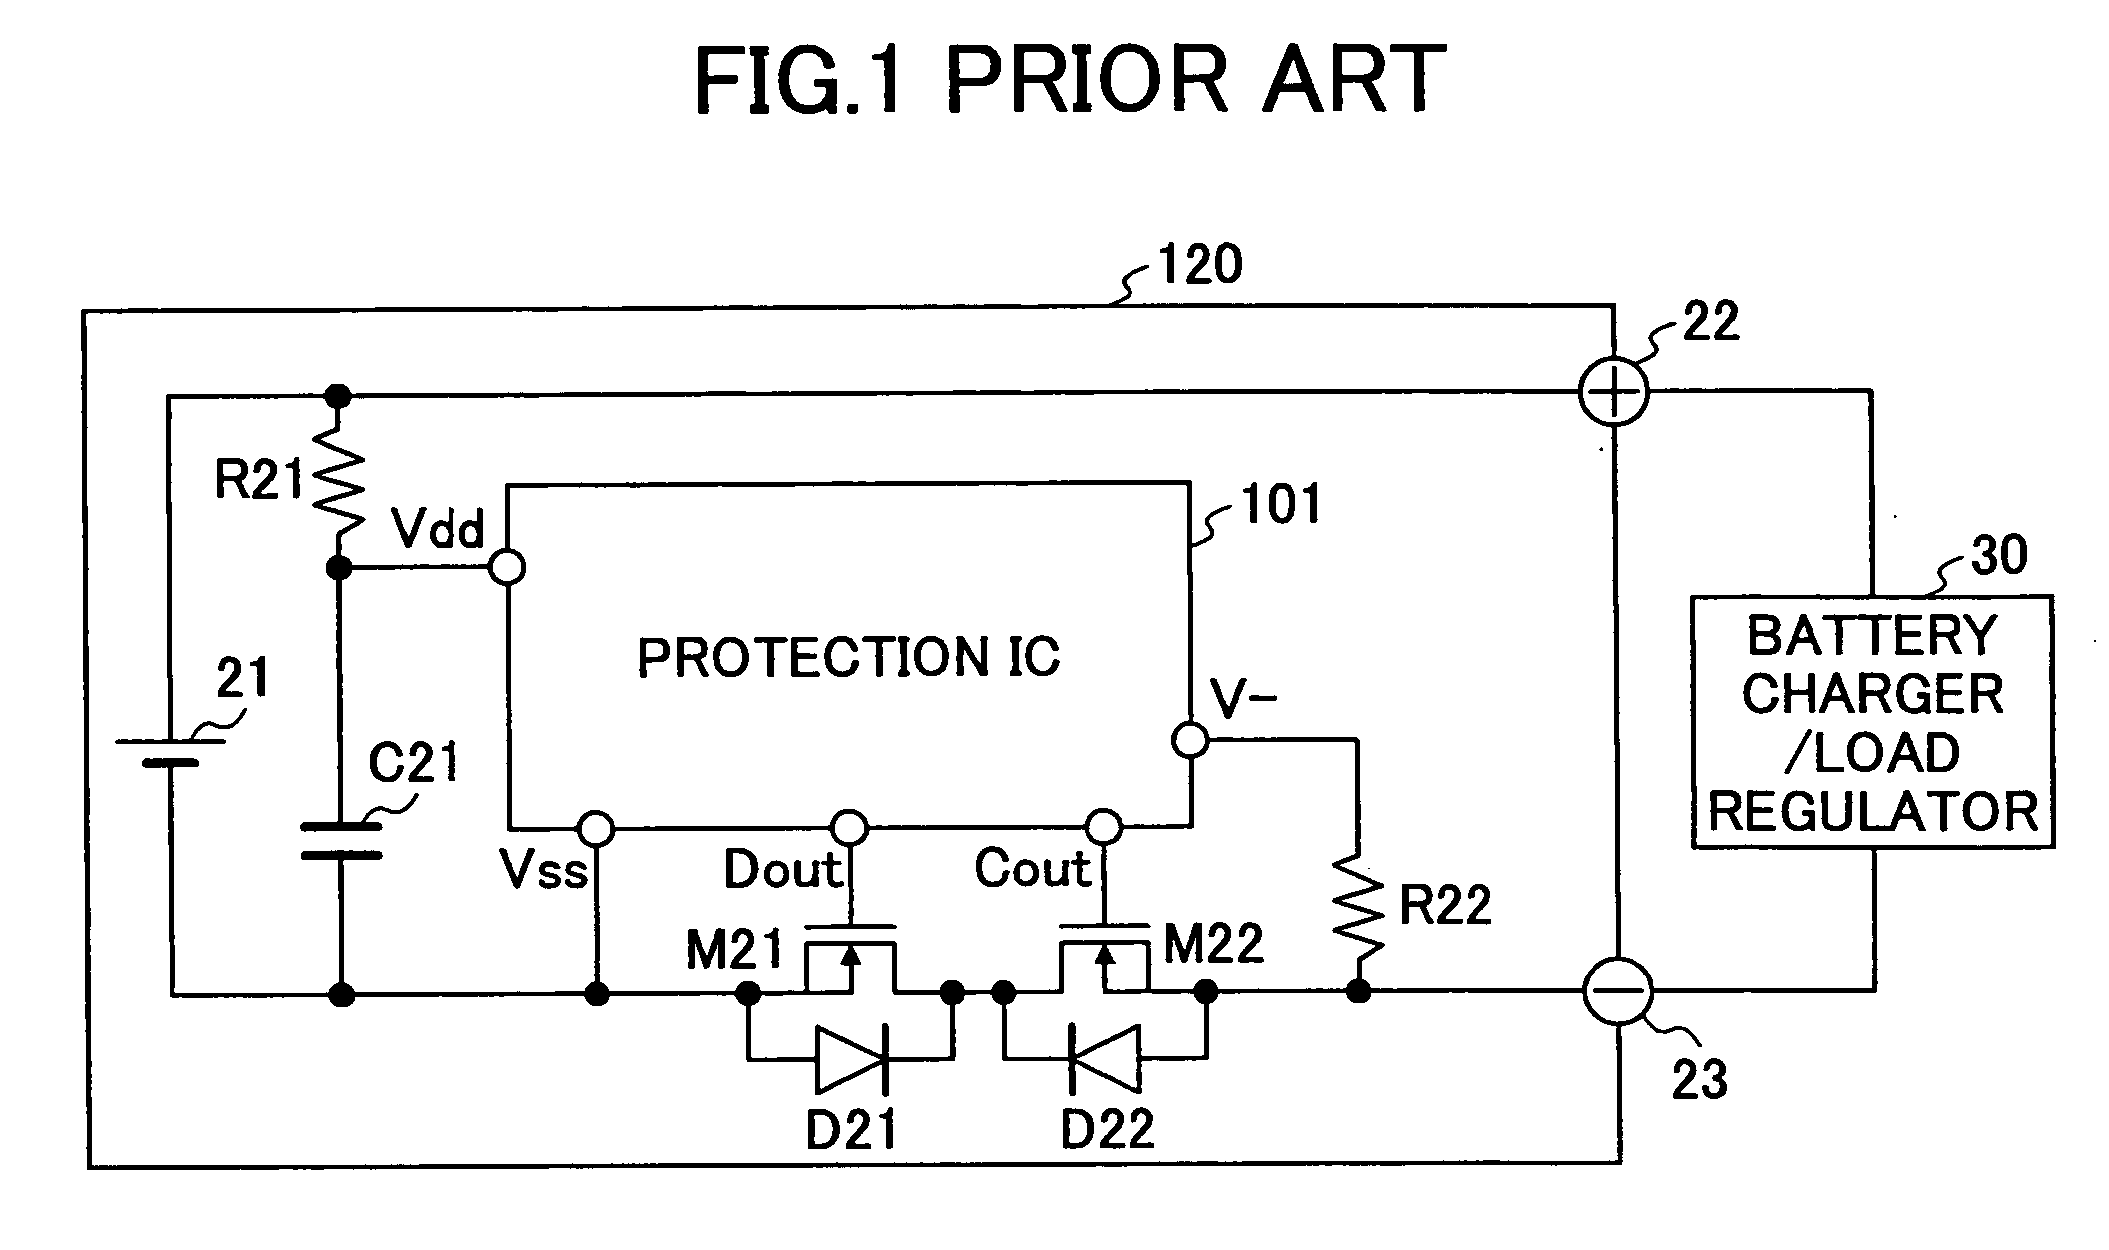 Semiconductor device for protecting rechargeable battery